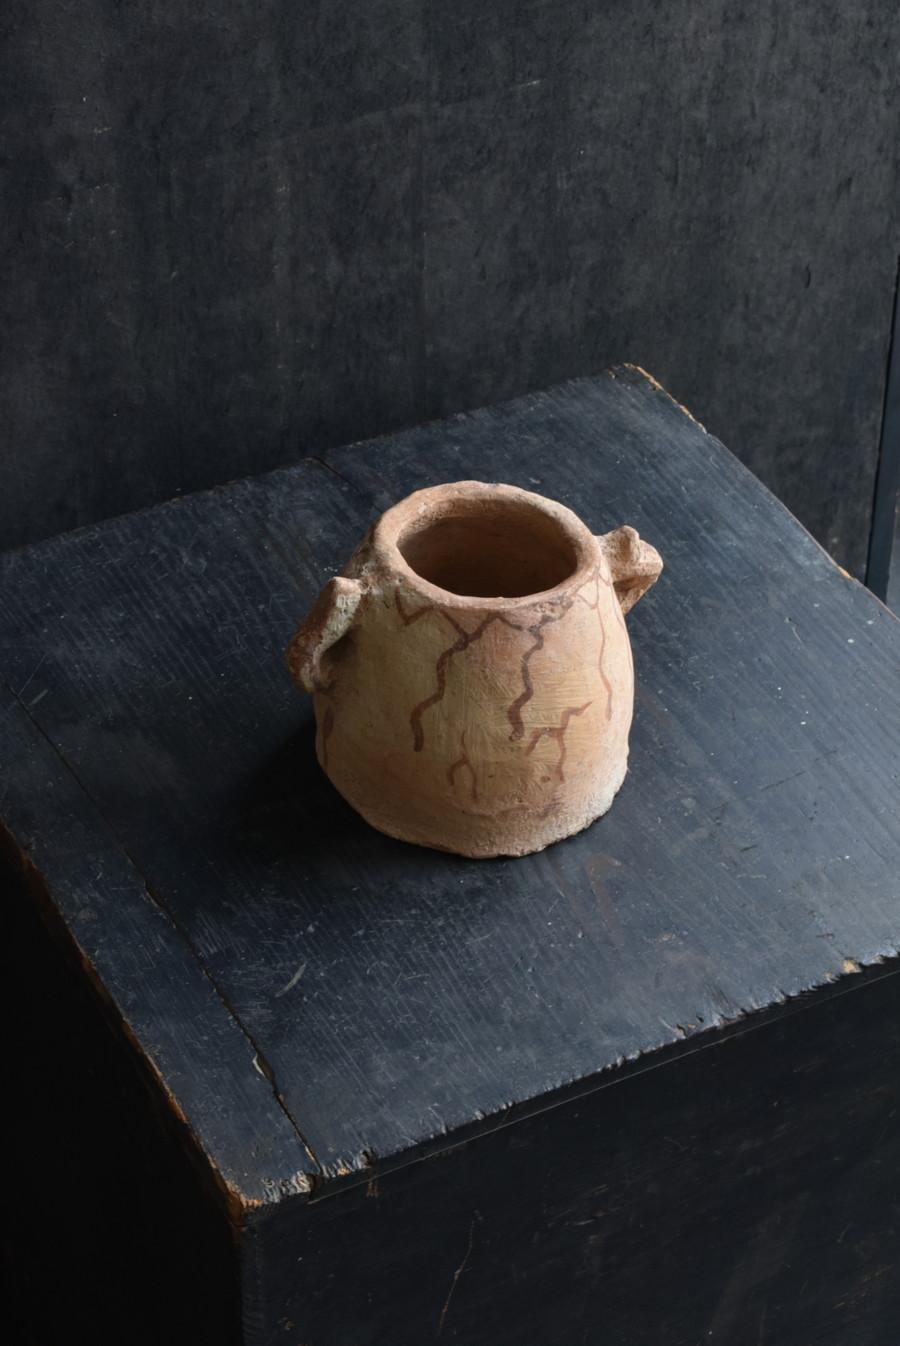 This is an antique Moroccan pottery jar that belonged to a Japanese pottery collector.
Unglazed pottery also exists in Morocco.
This was probably excavated.
This pattern is characteristic of Moroccan pottery.
In addition, it has two ears, and